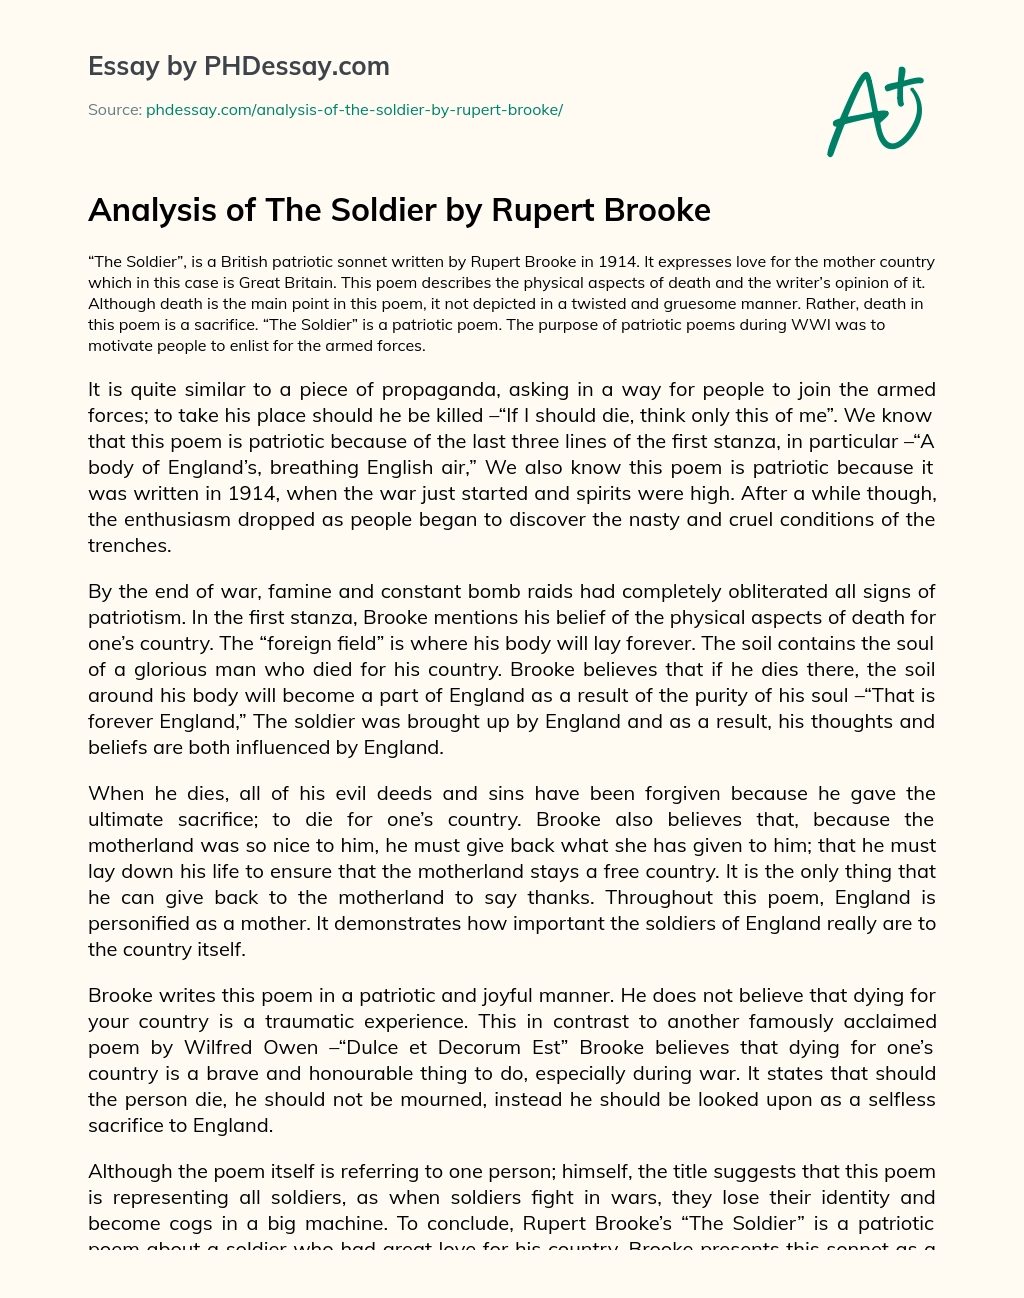 analysis of the poem the soldier by rupert brooke